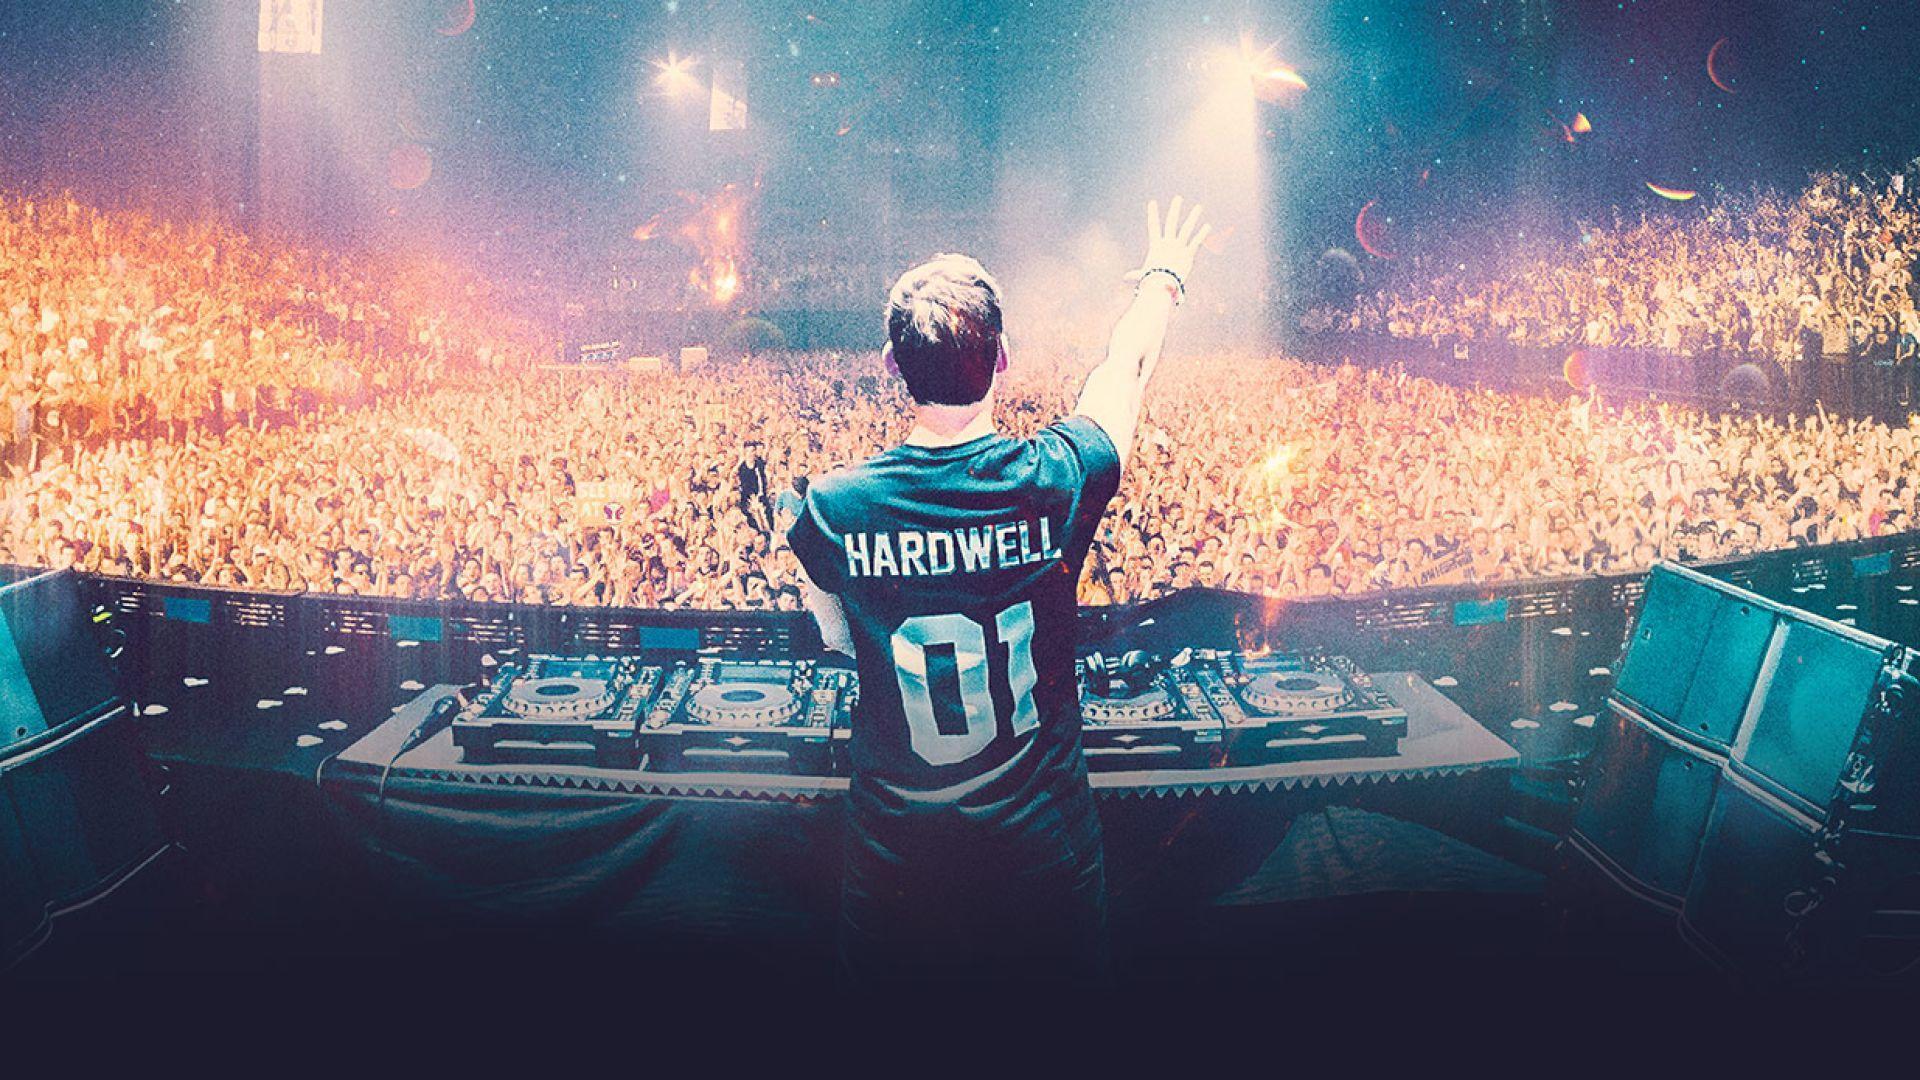 Hardwell Wallpaper and Background Image